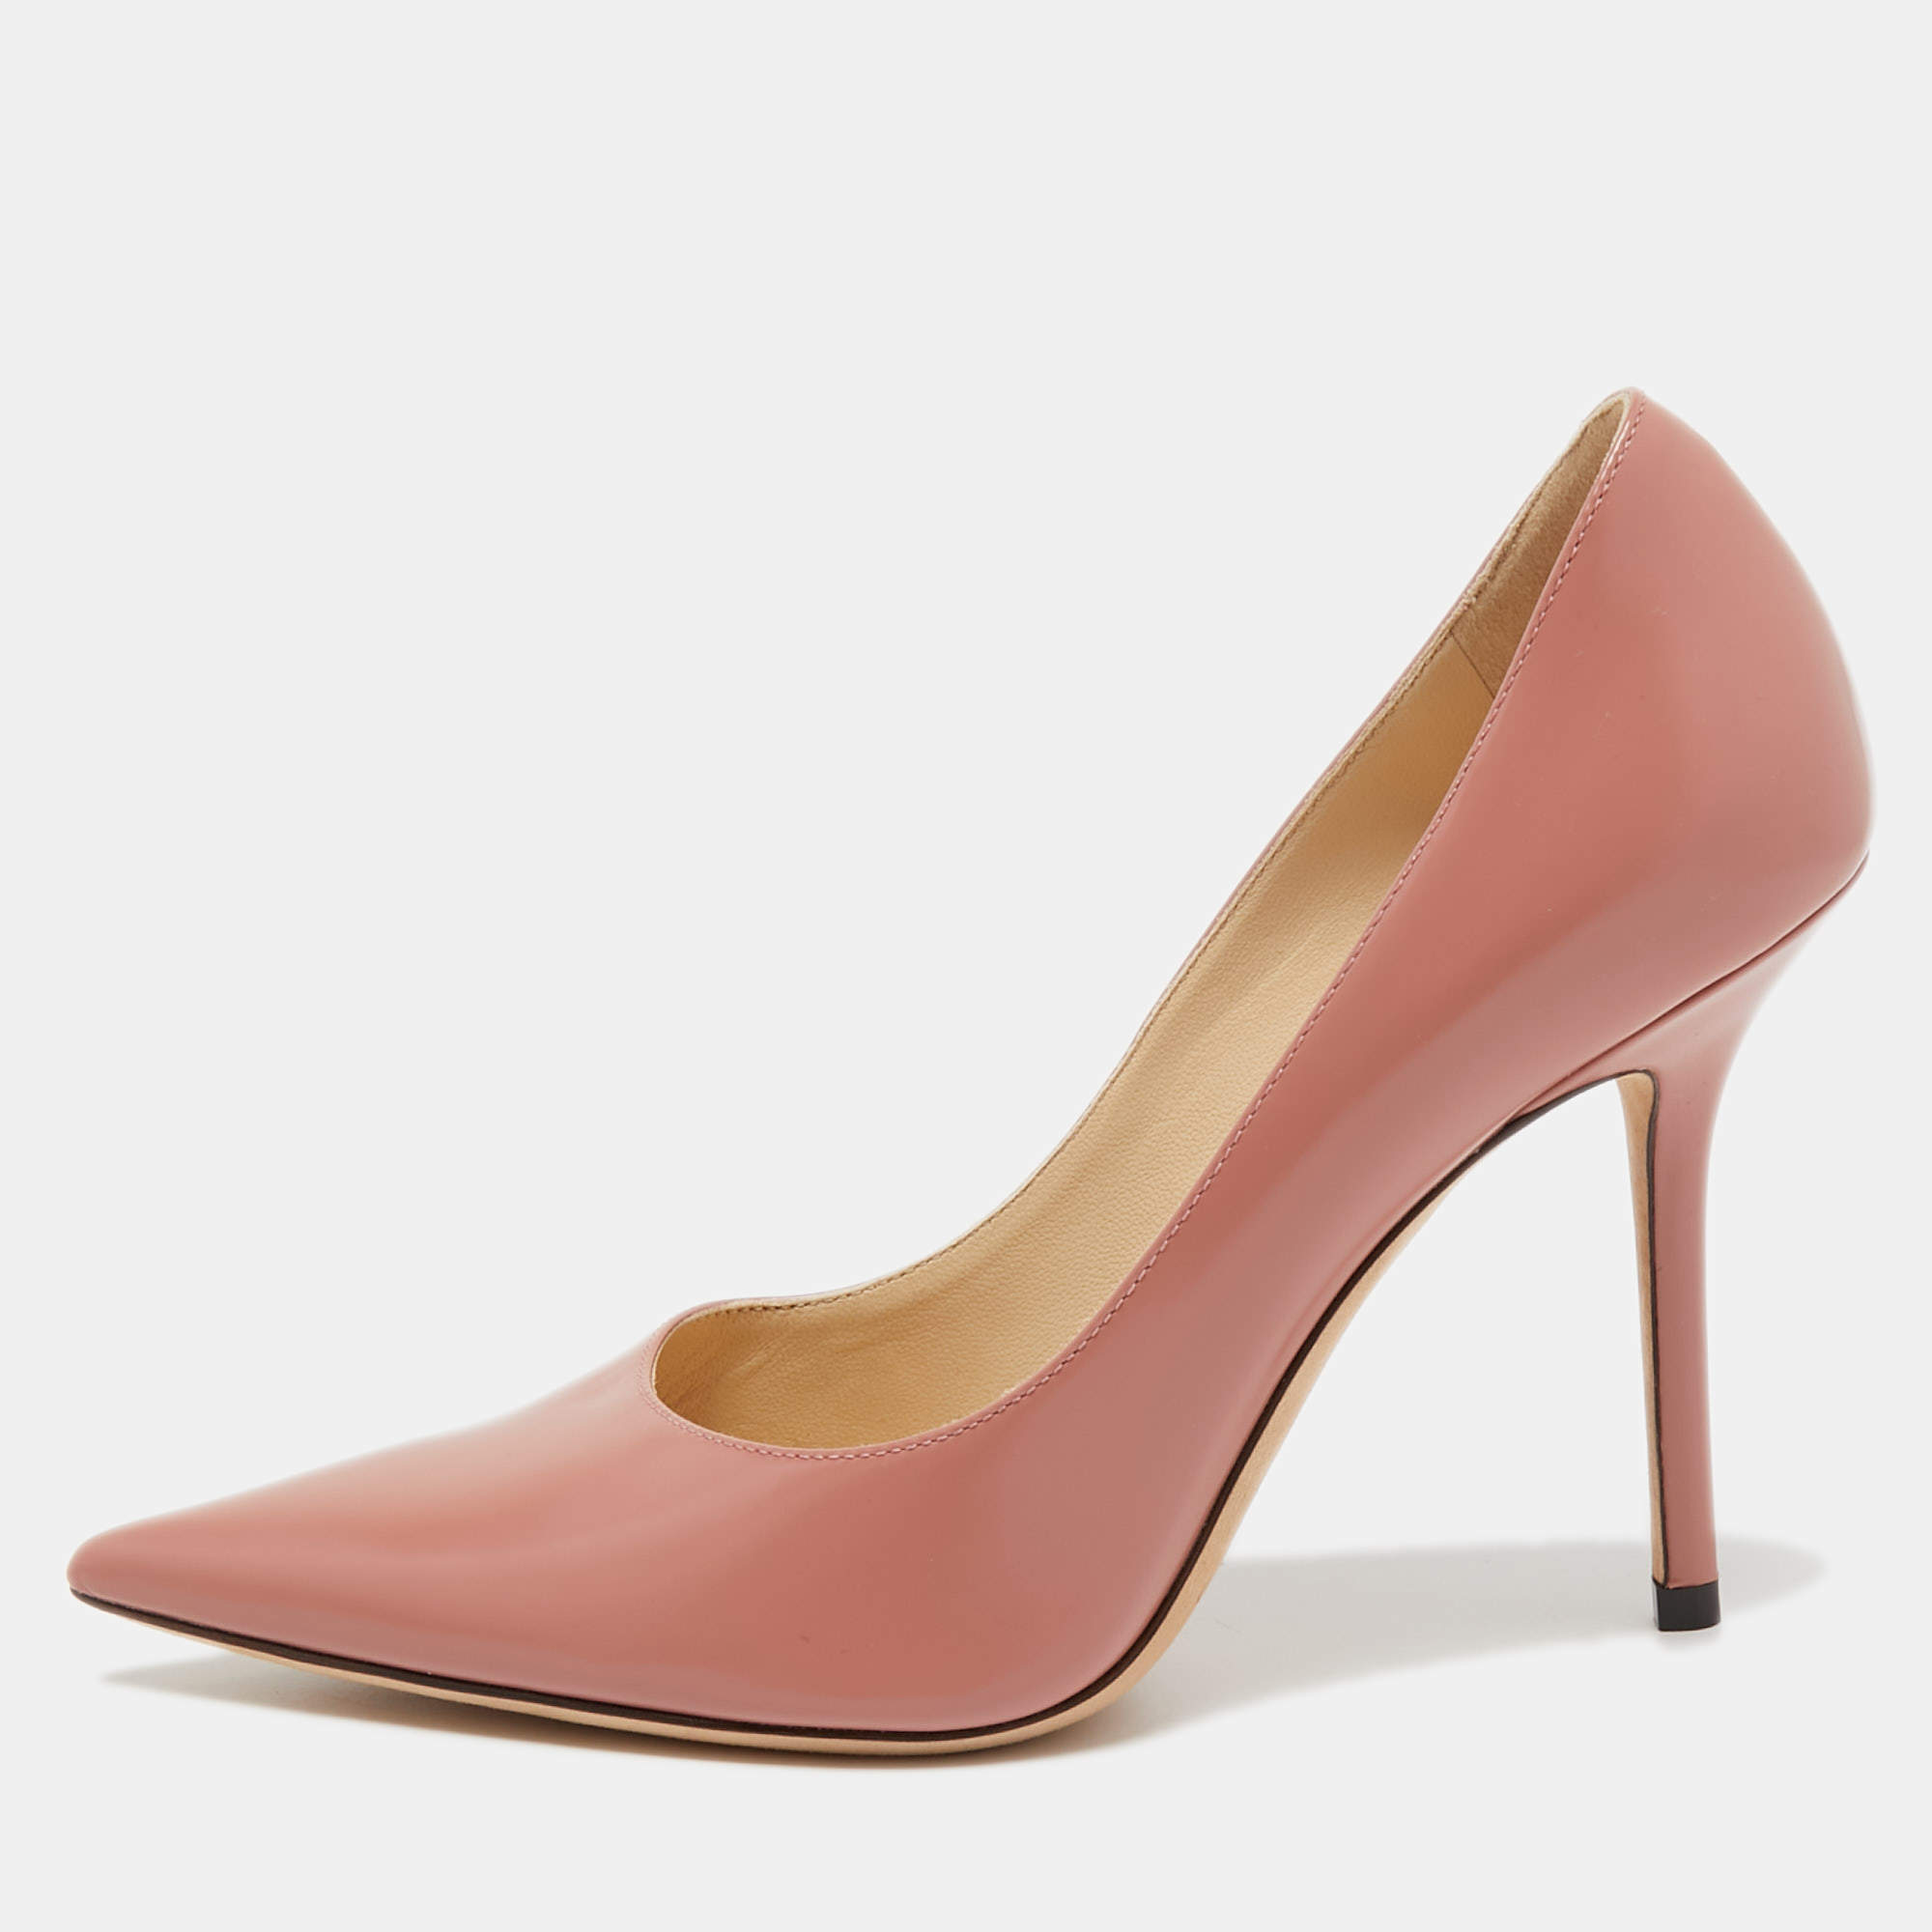 Jimmy Choo Pink Leather Love Pumps Size 35.5 